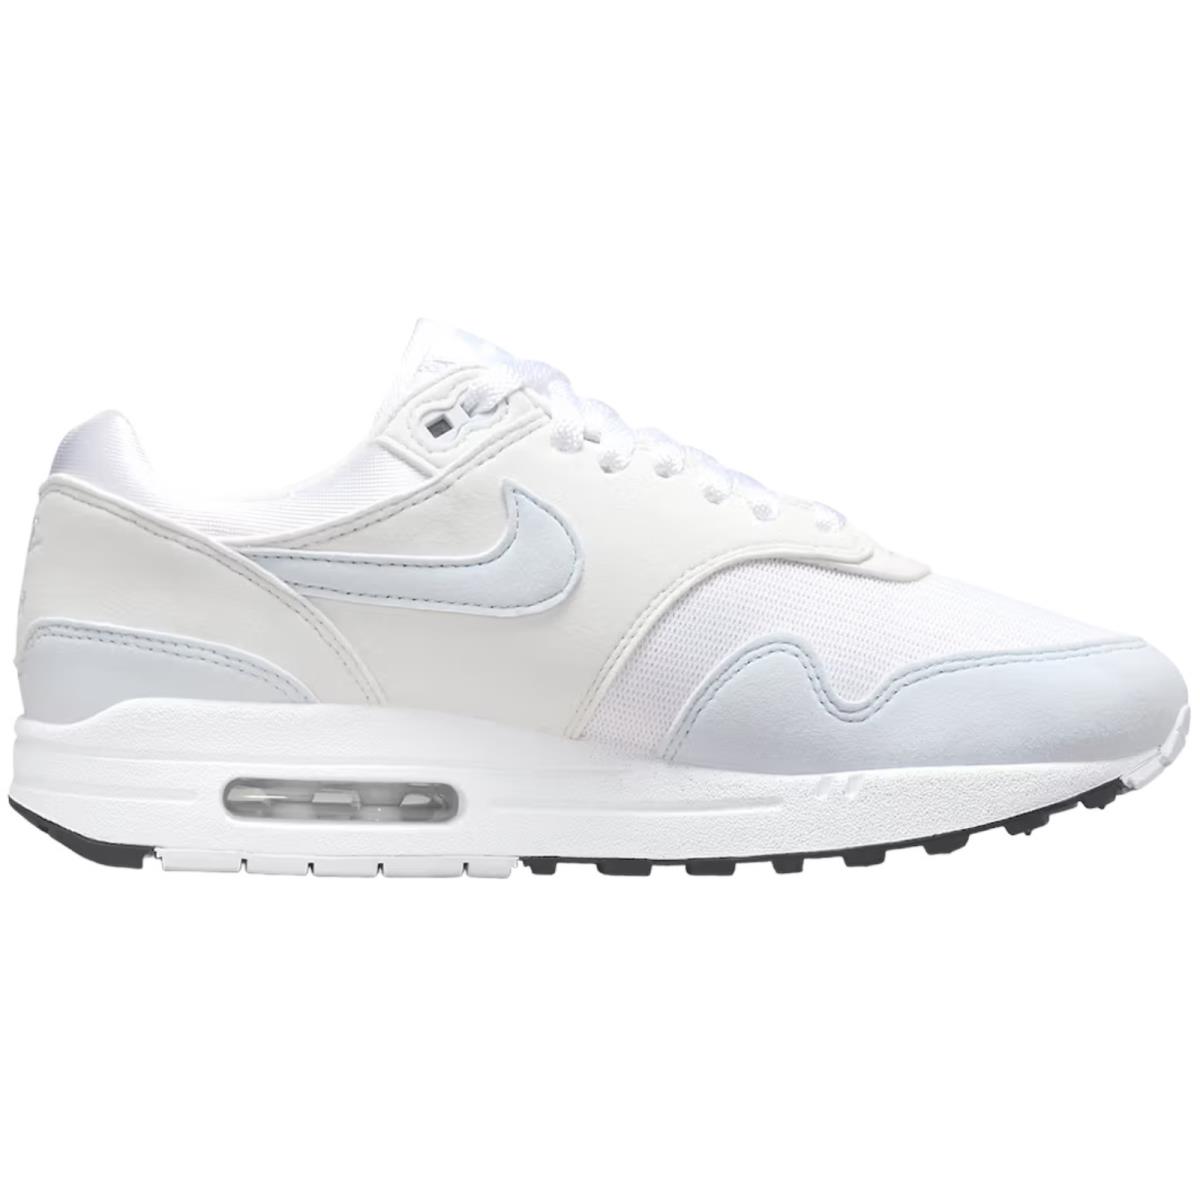 Nike Air Max 1 Women`s Casual Shoes All Colors US Sizes 6-11 White/Football Grey/Platinum Tint/Black